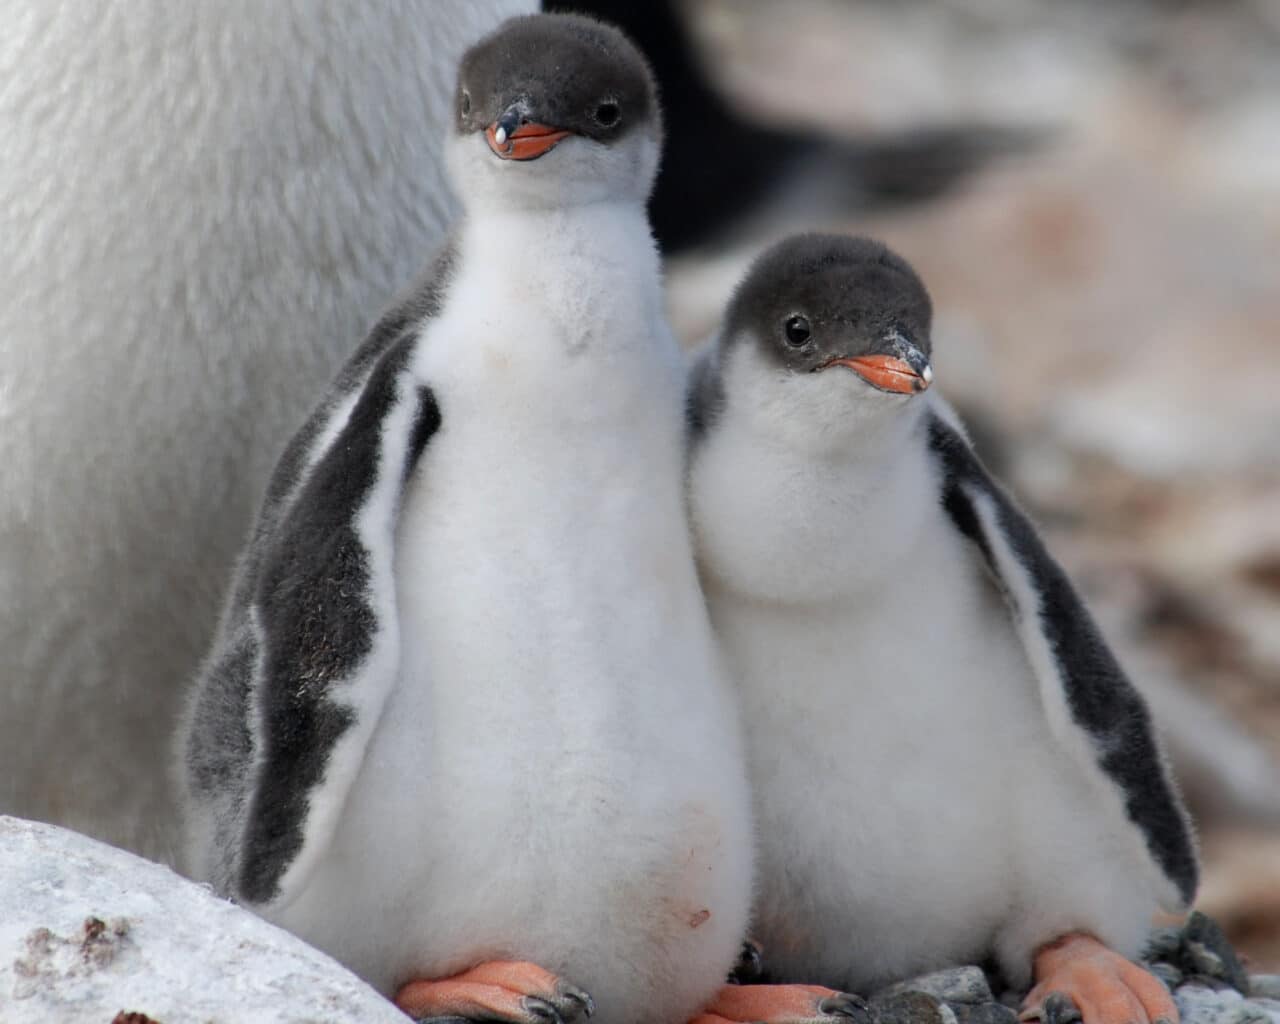 Two baby penguins.